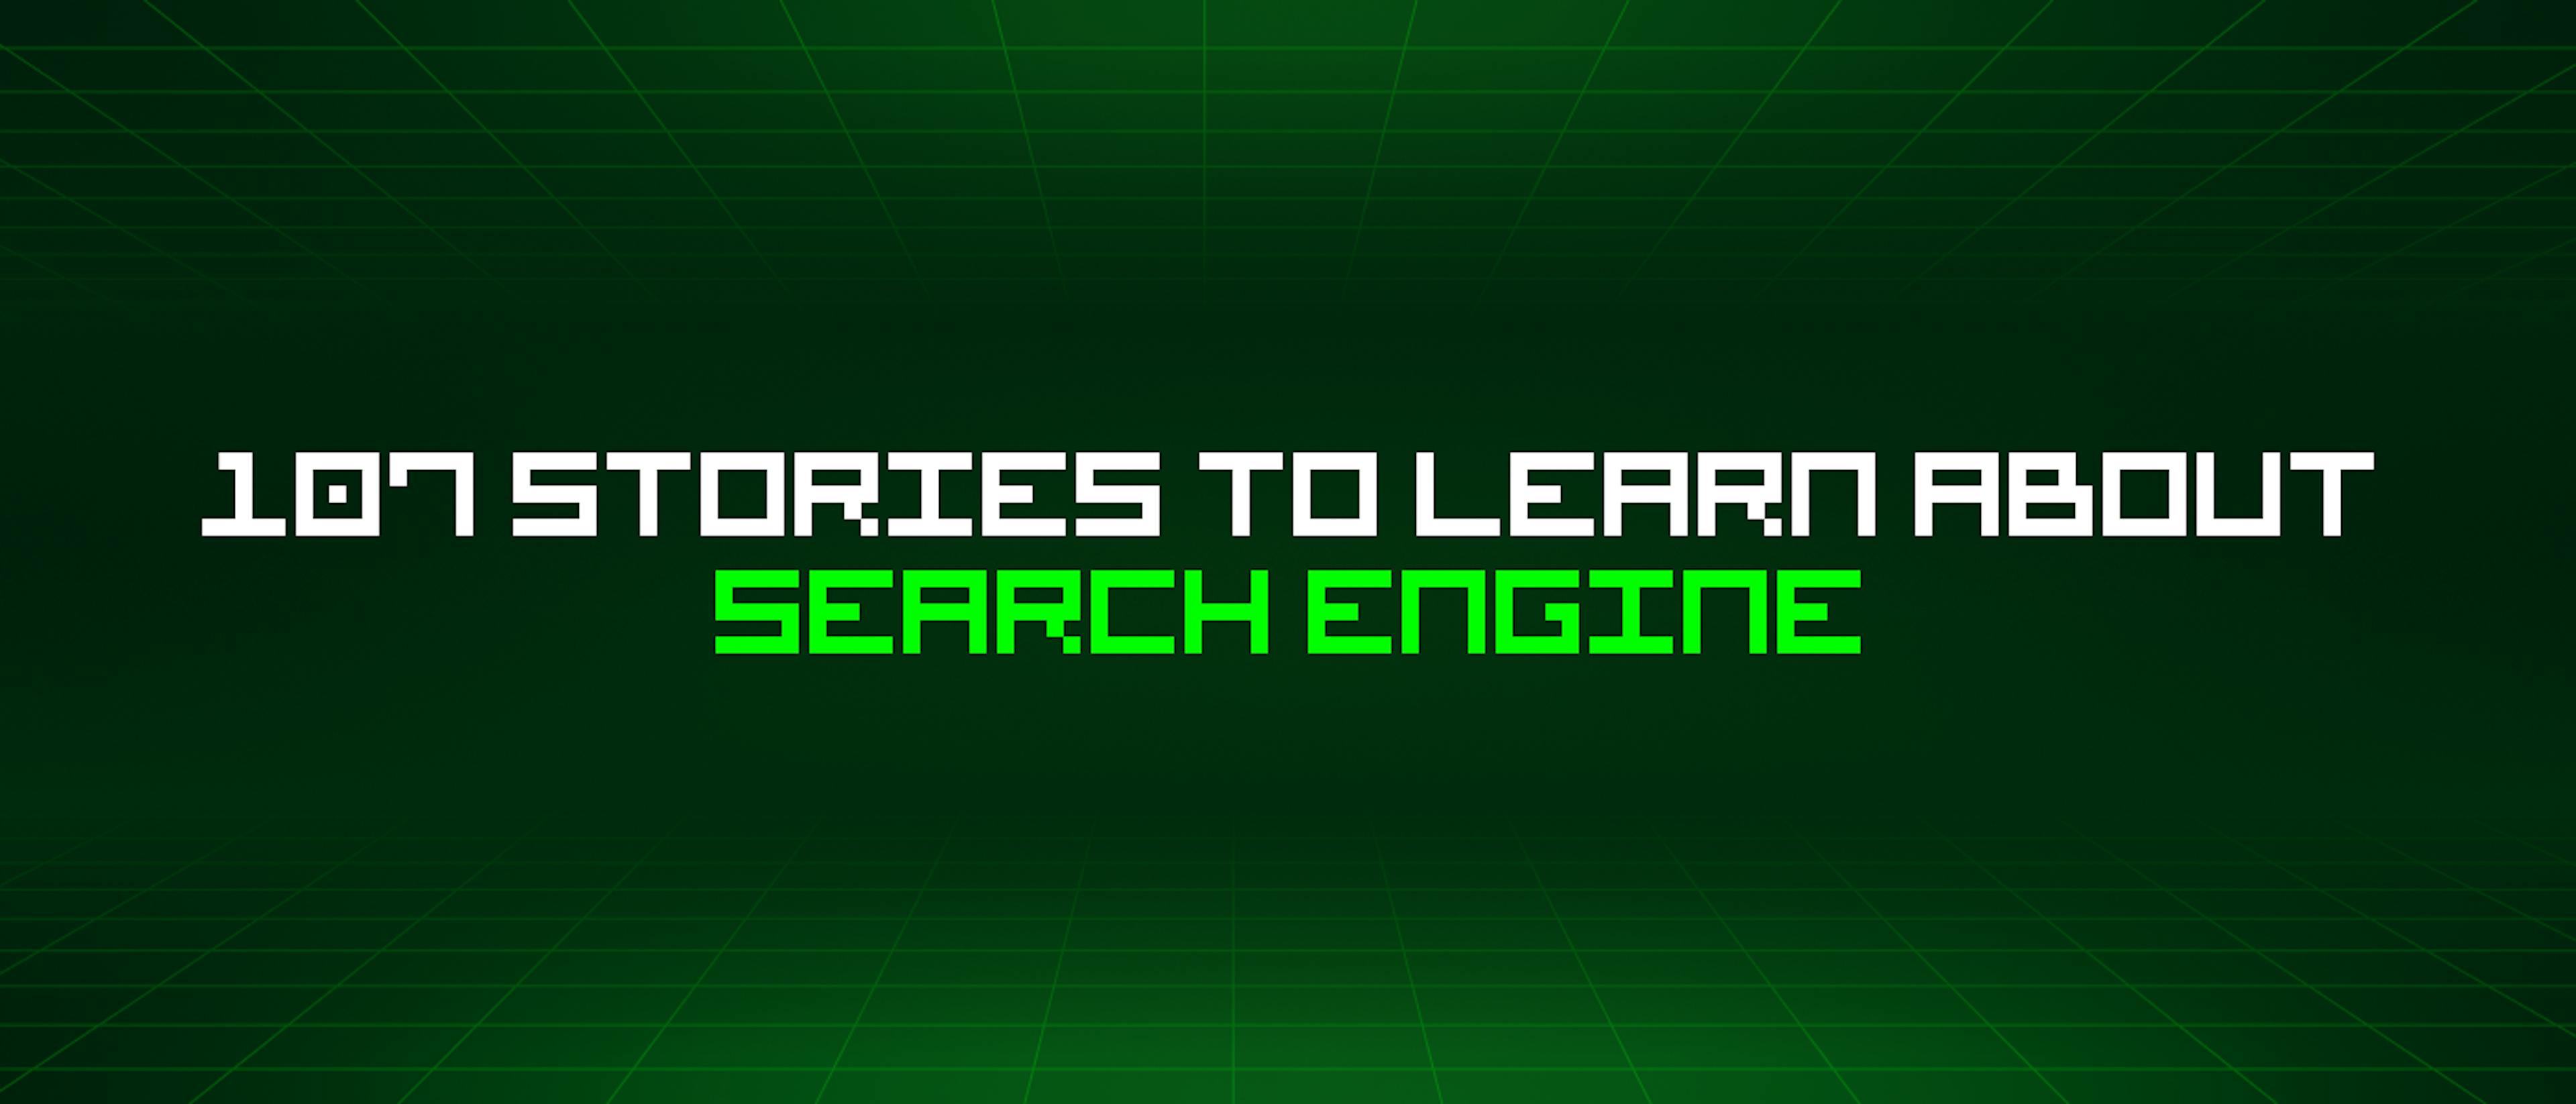 featured image - 107 Stories To Learn About Search Engine